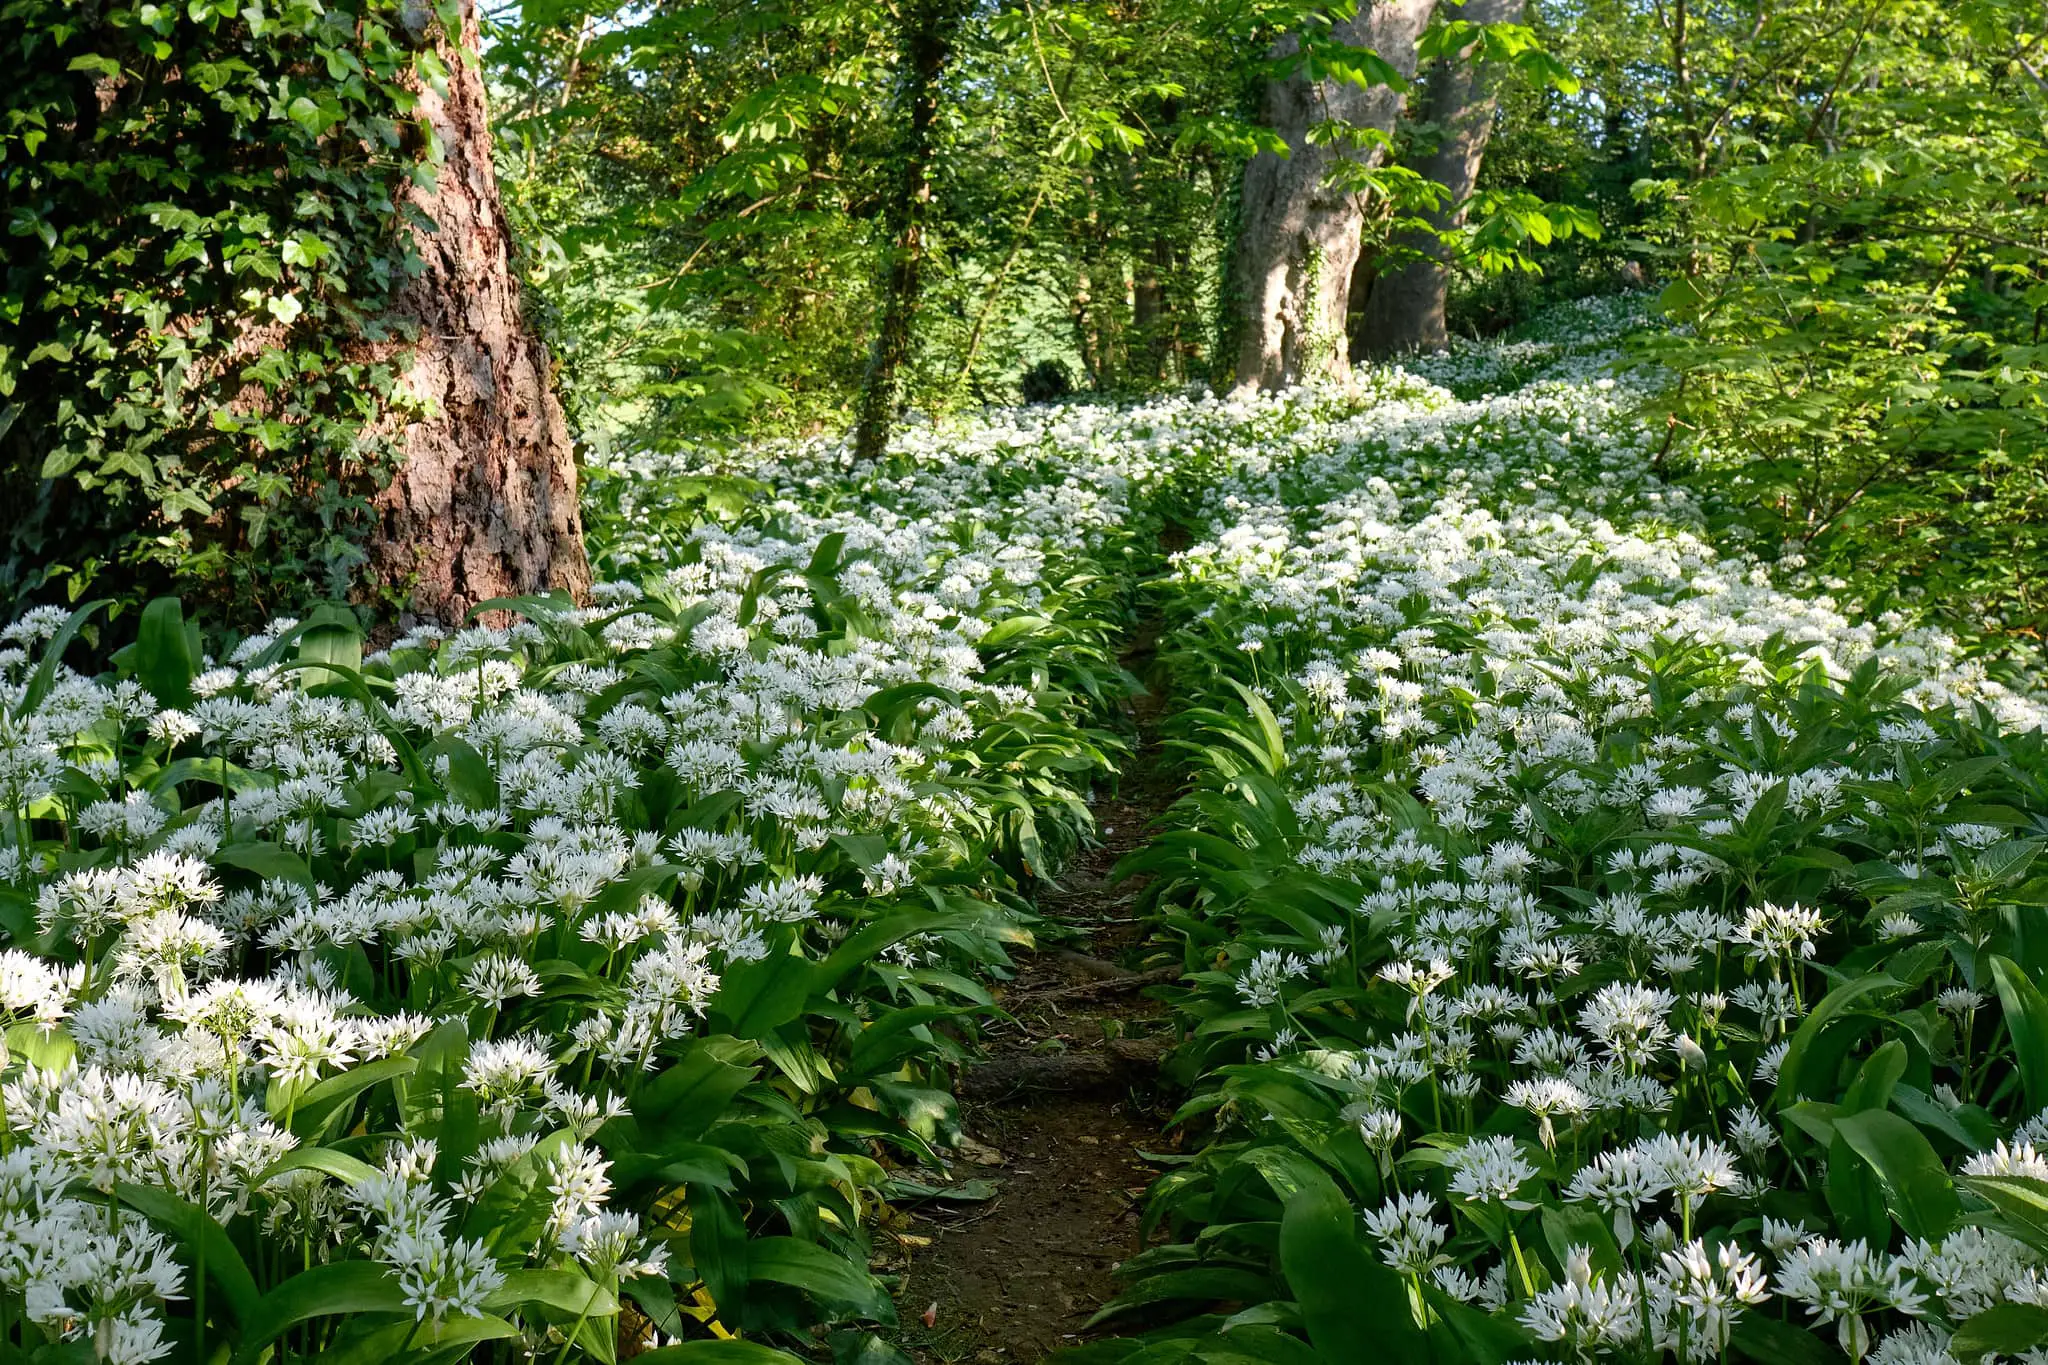 A carpet of wild garlic in the woods